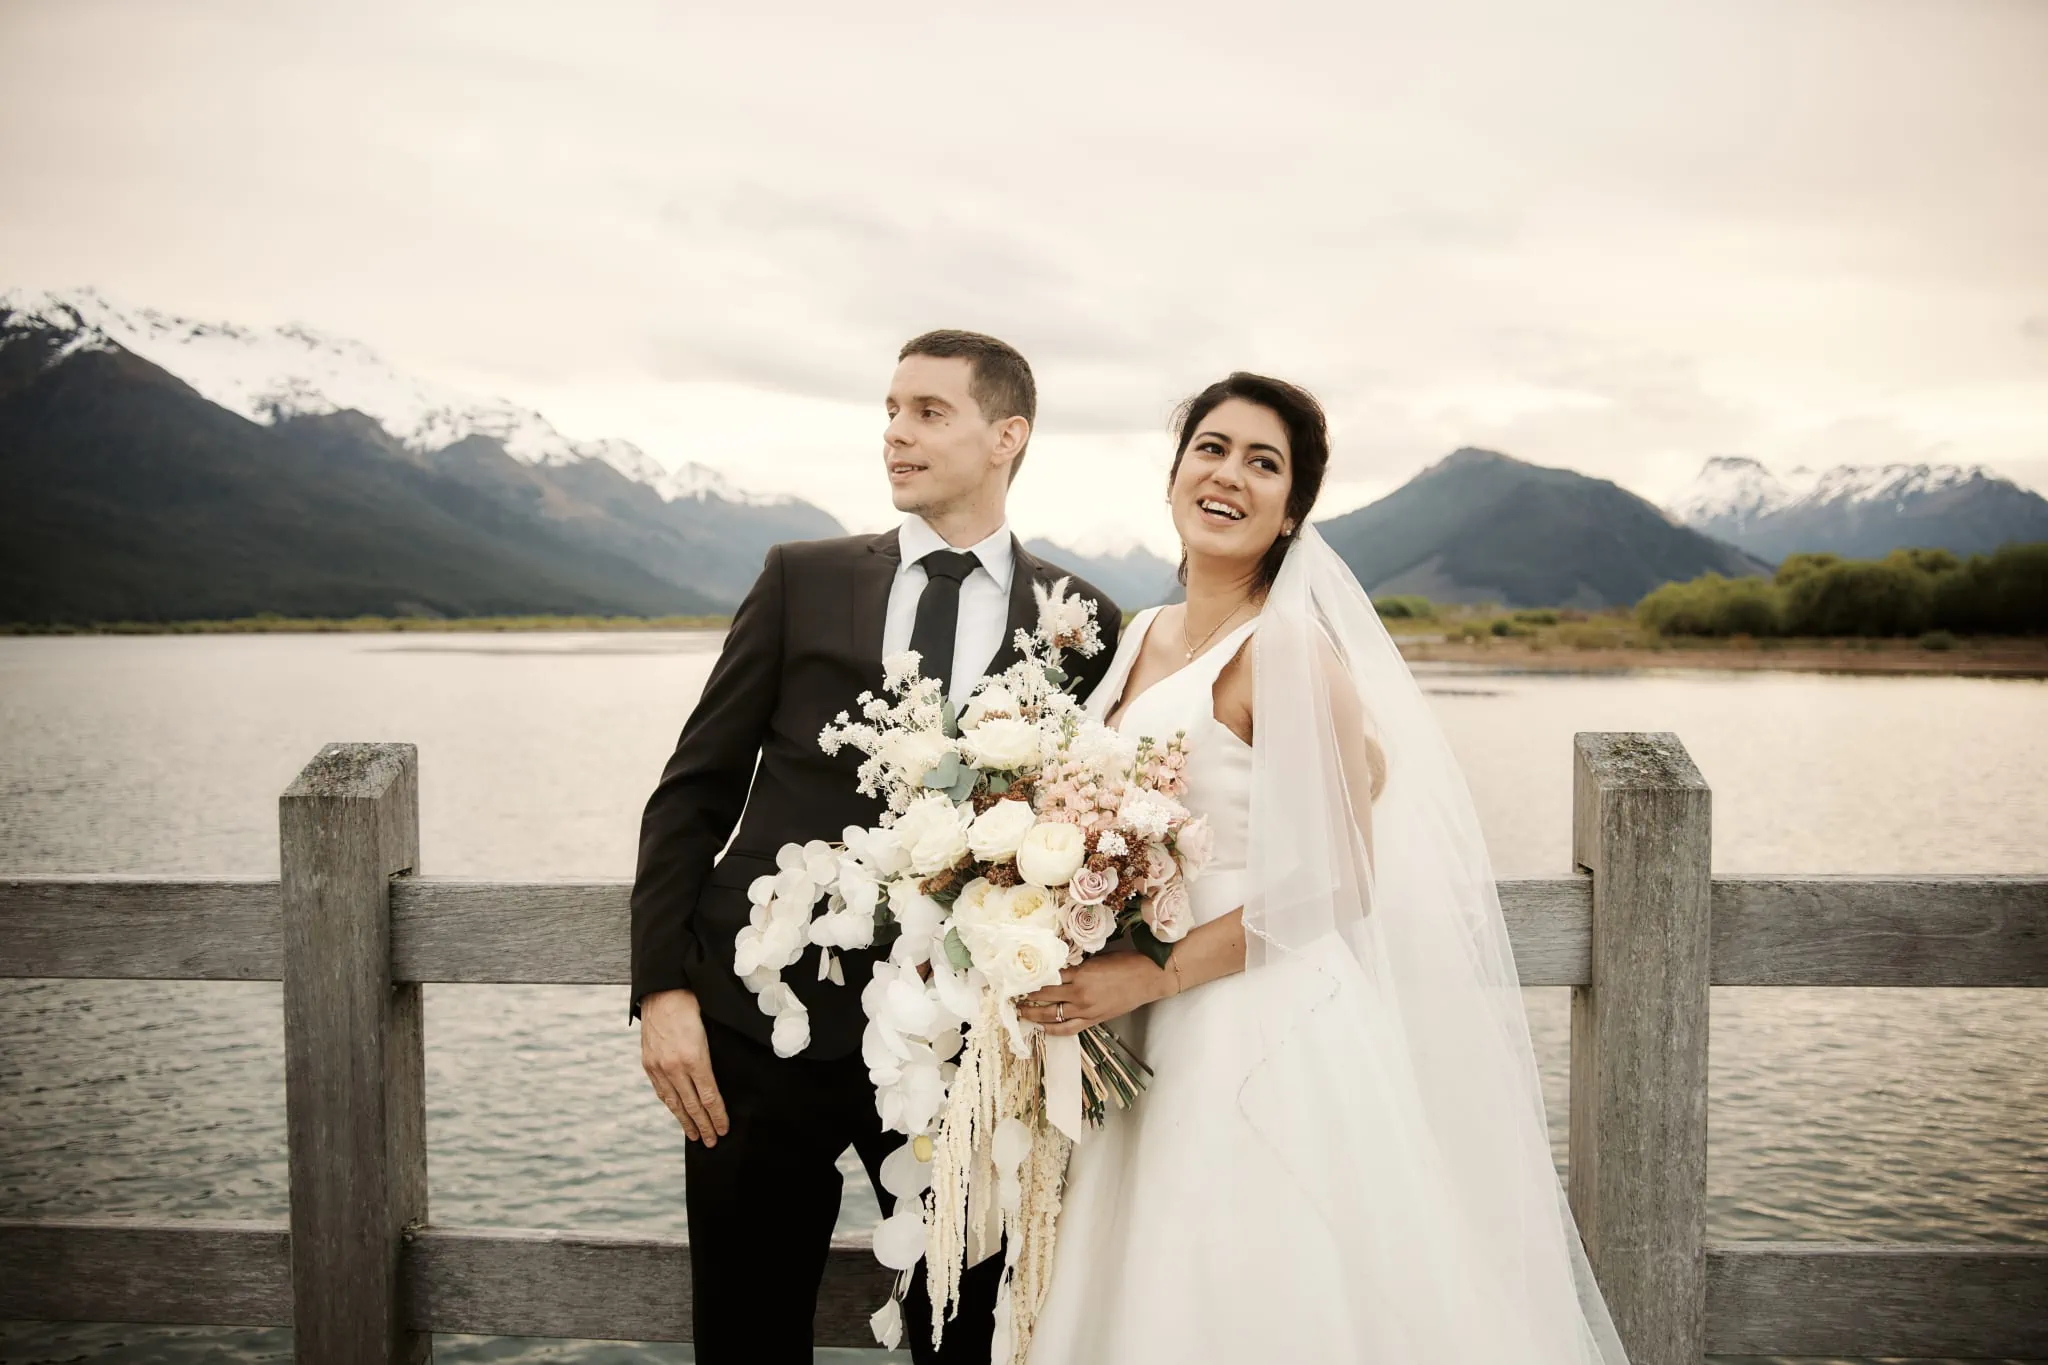 Keywords: Michelle and Vedran, lake.